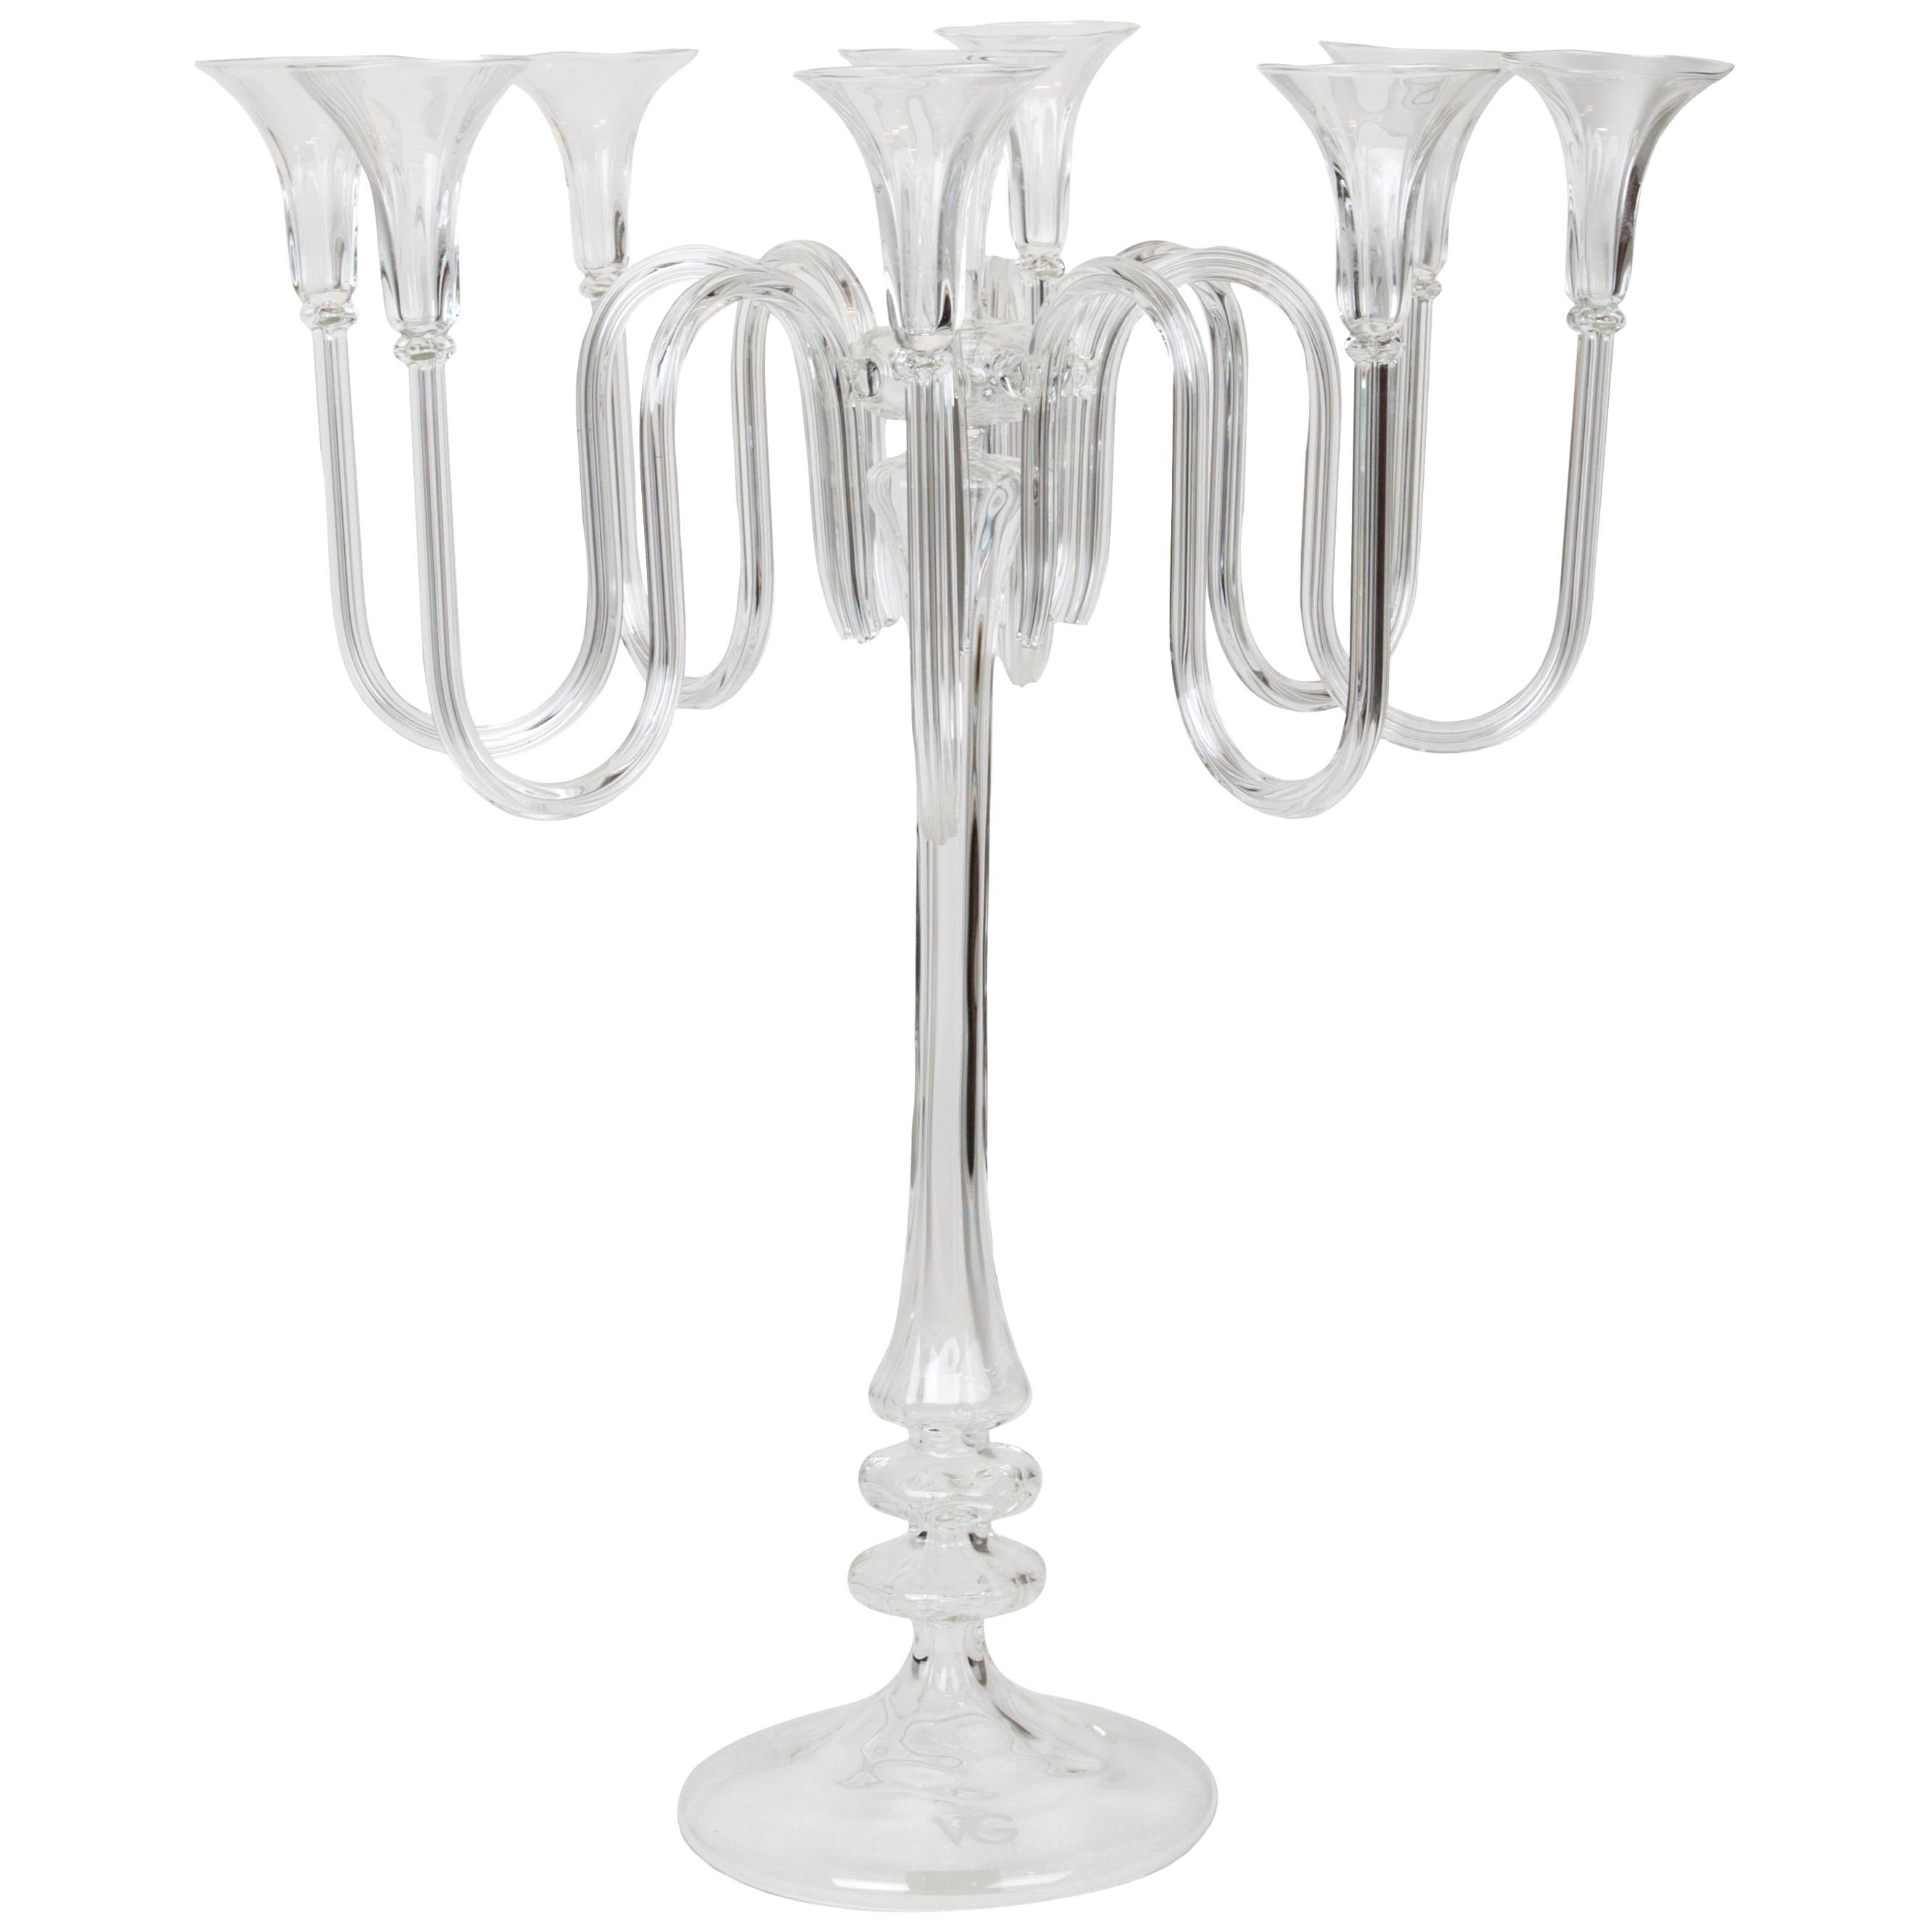 Candleholder Royal Pyrex with 9 Arms, in Pyrex, Italy